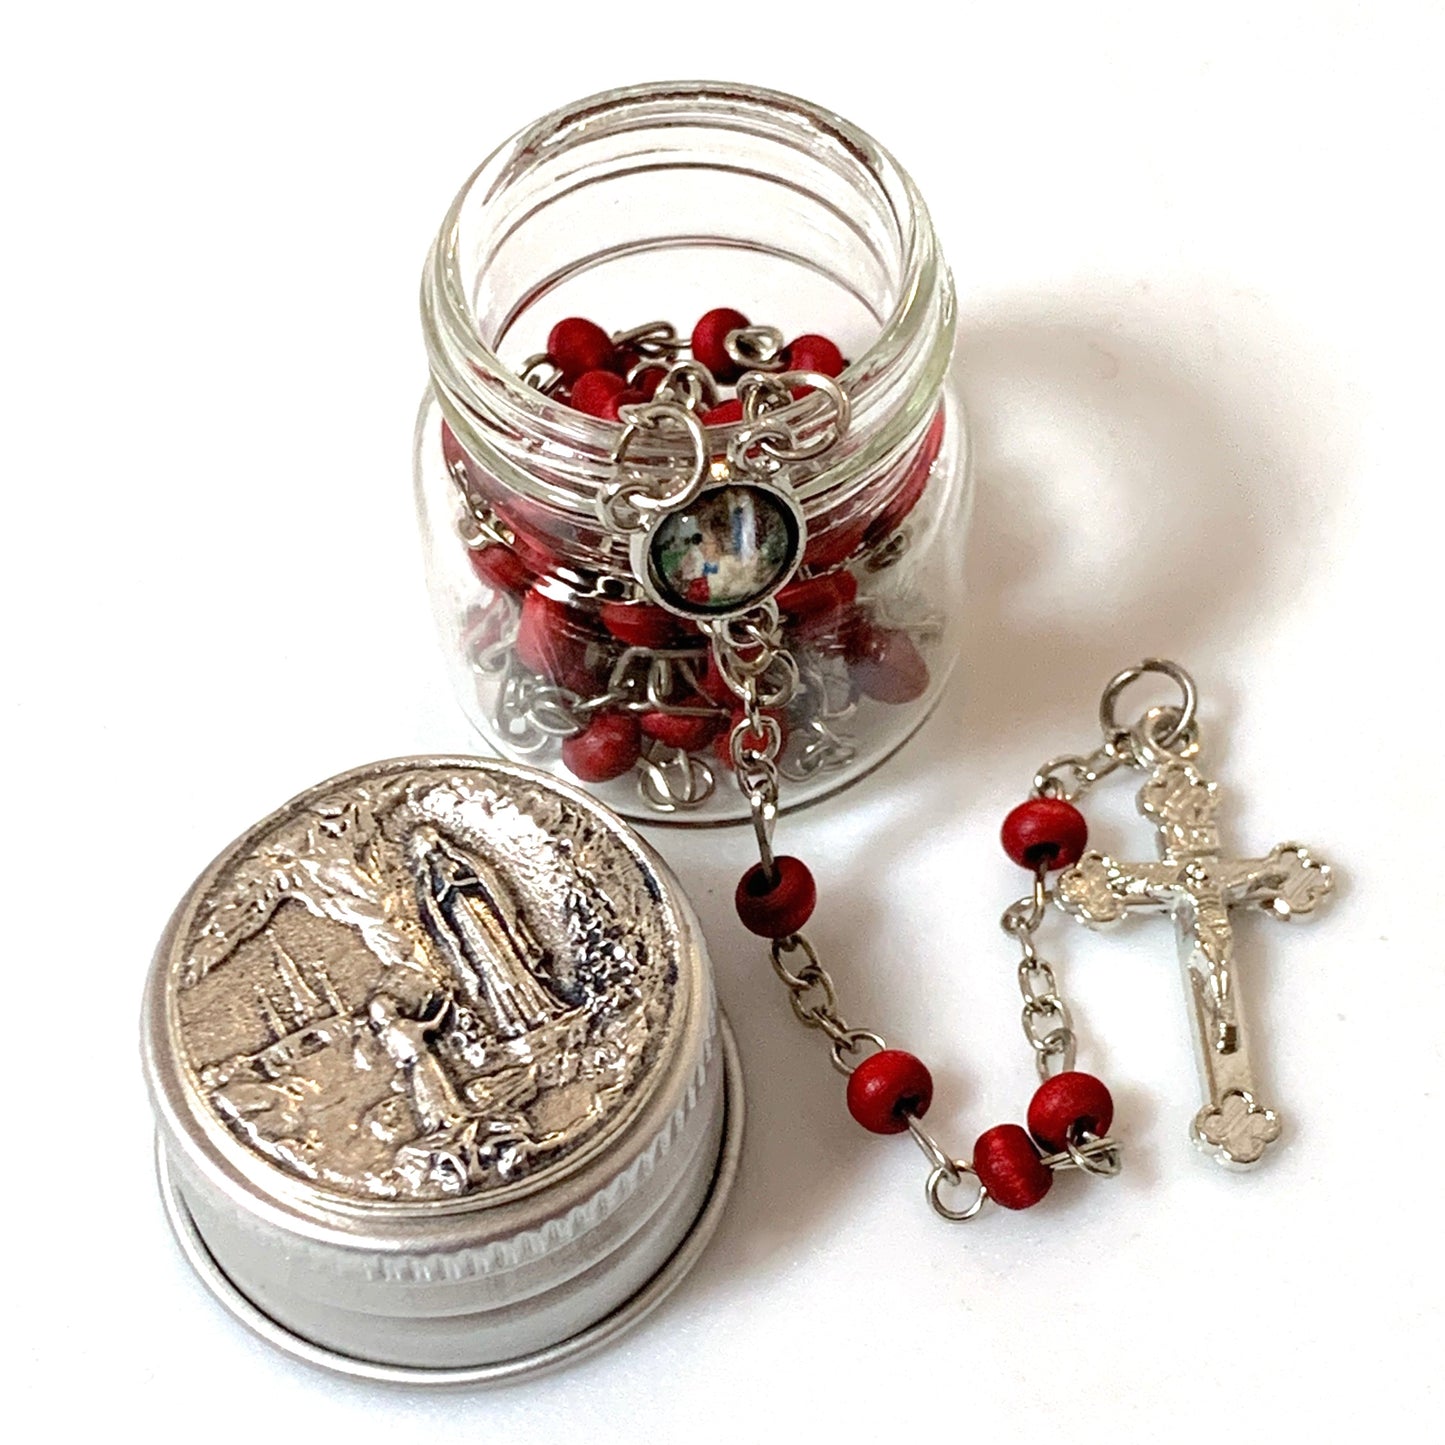 Tiny Rose Lourdes Rosary of Assorted Styles